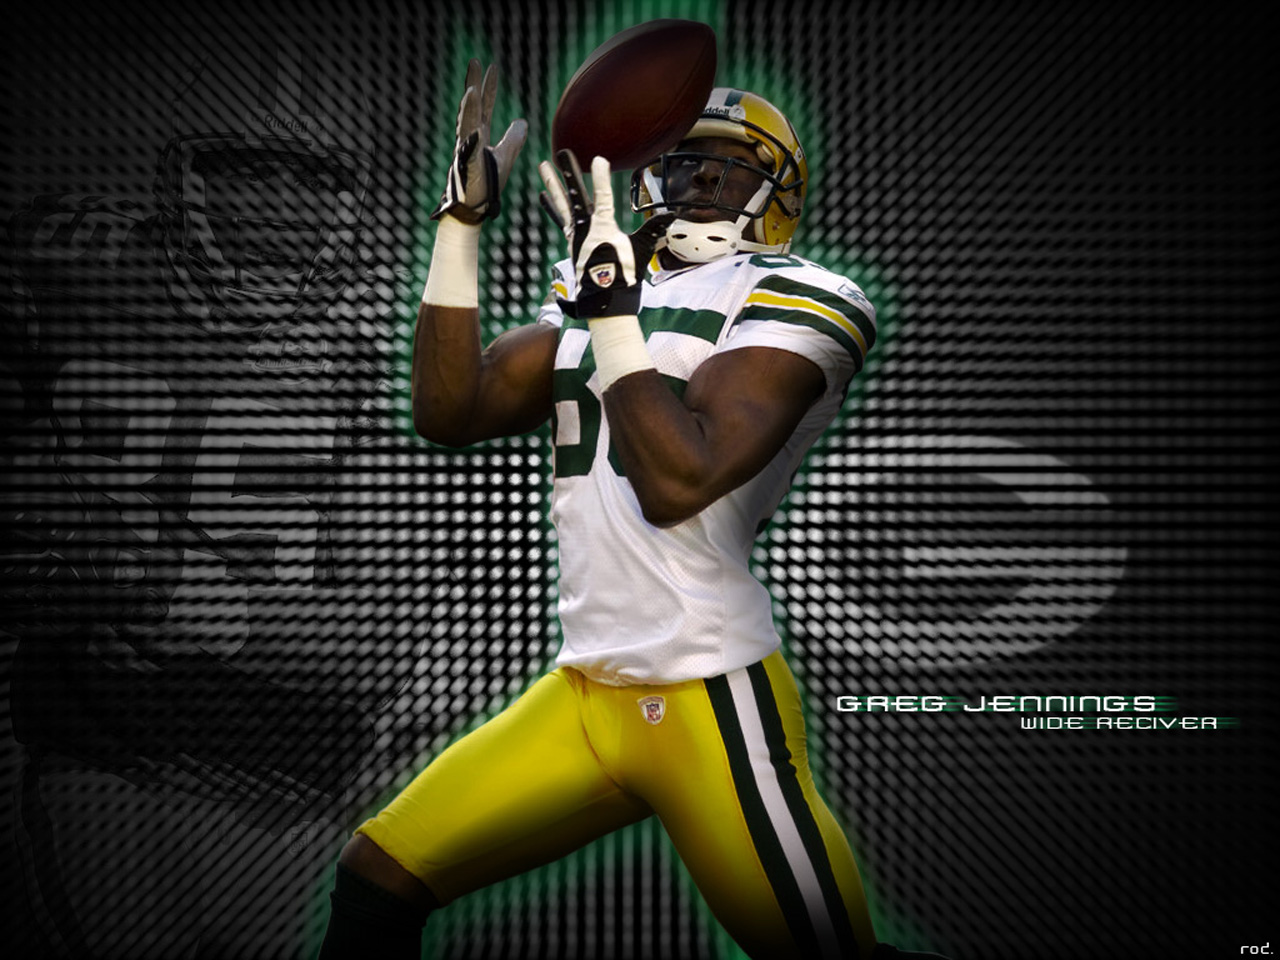 free packers wallpaper